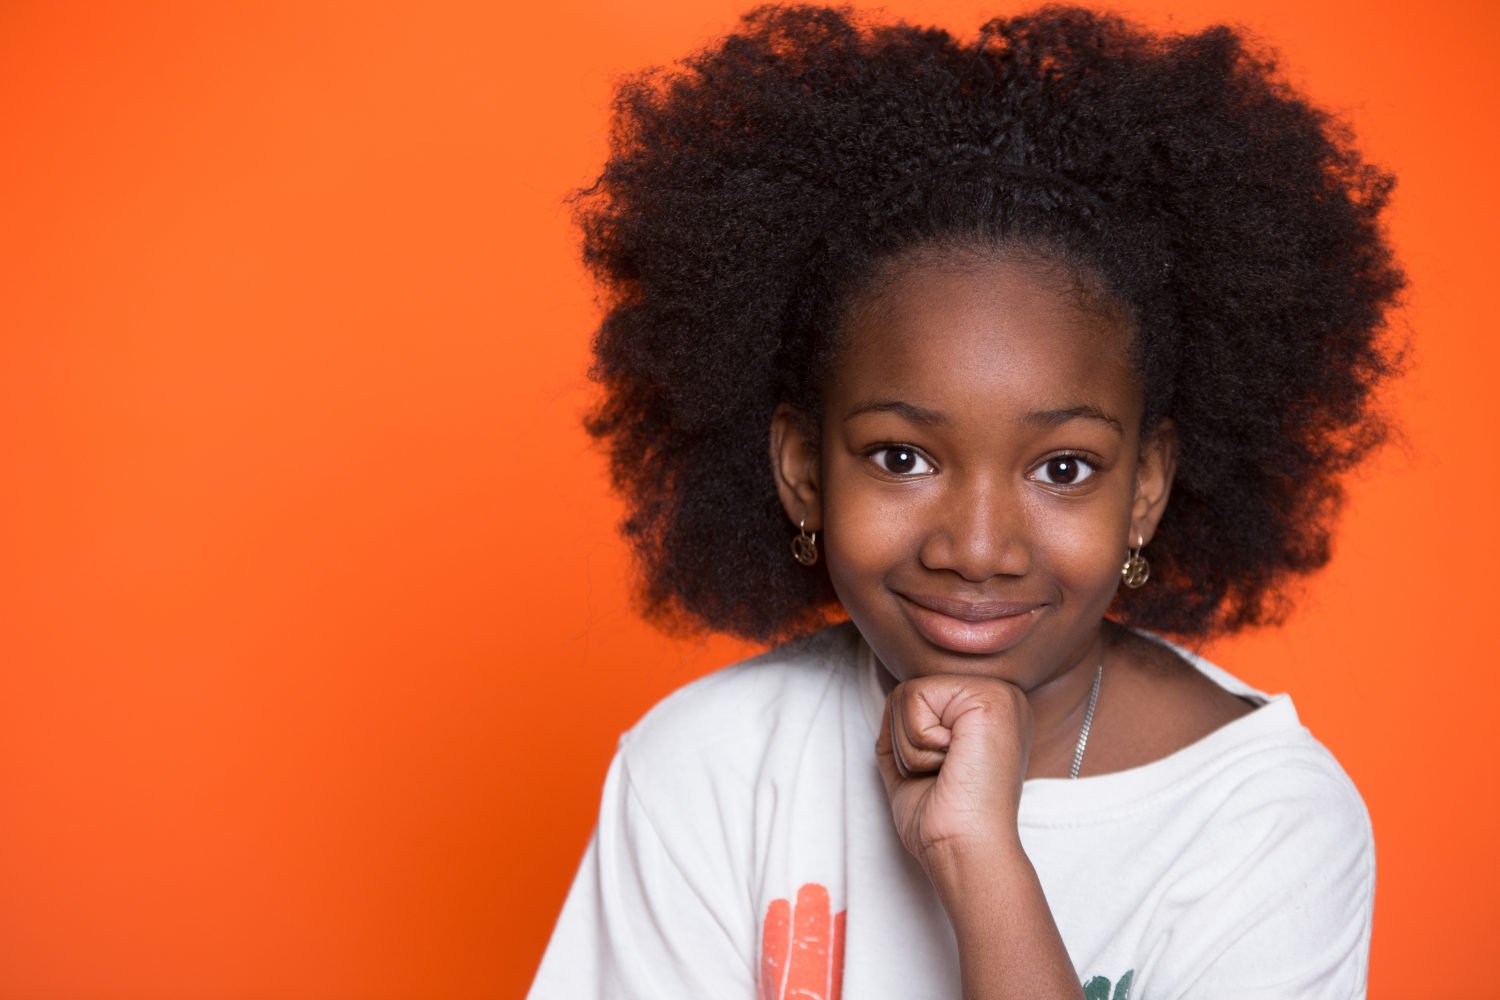 When Natural Hair Wins, Discrimination in School Loses